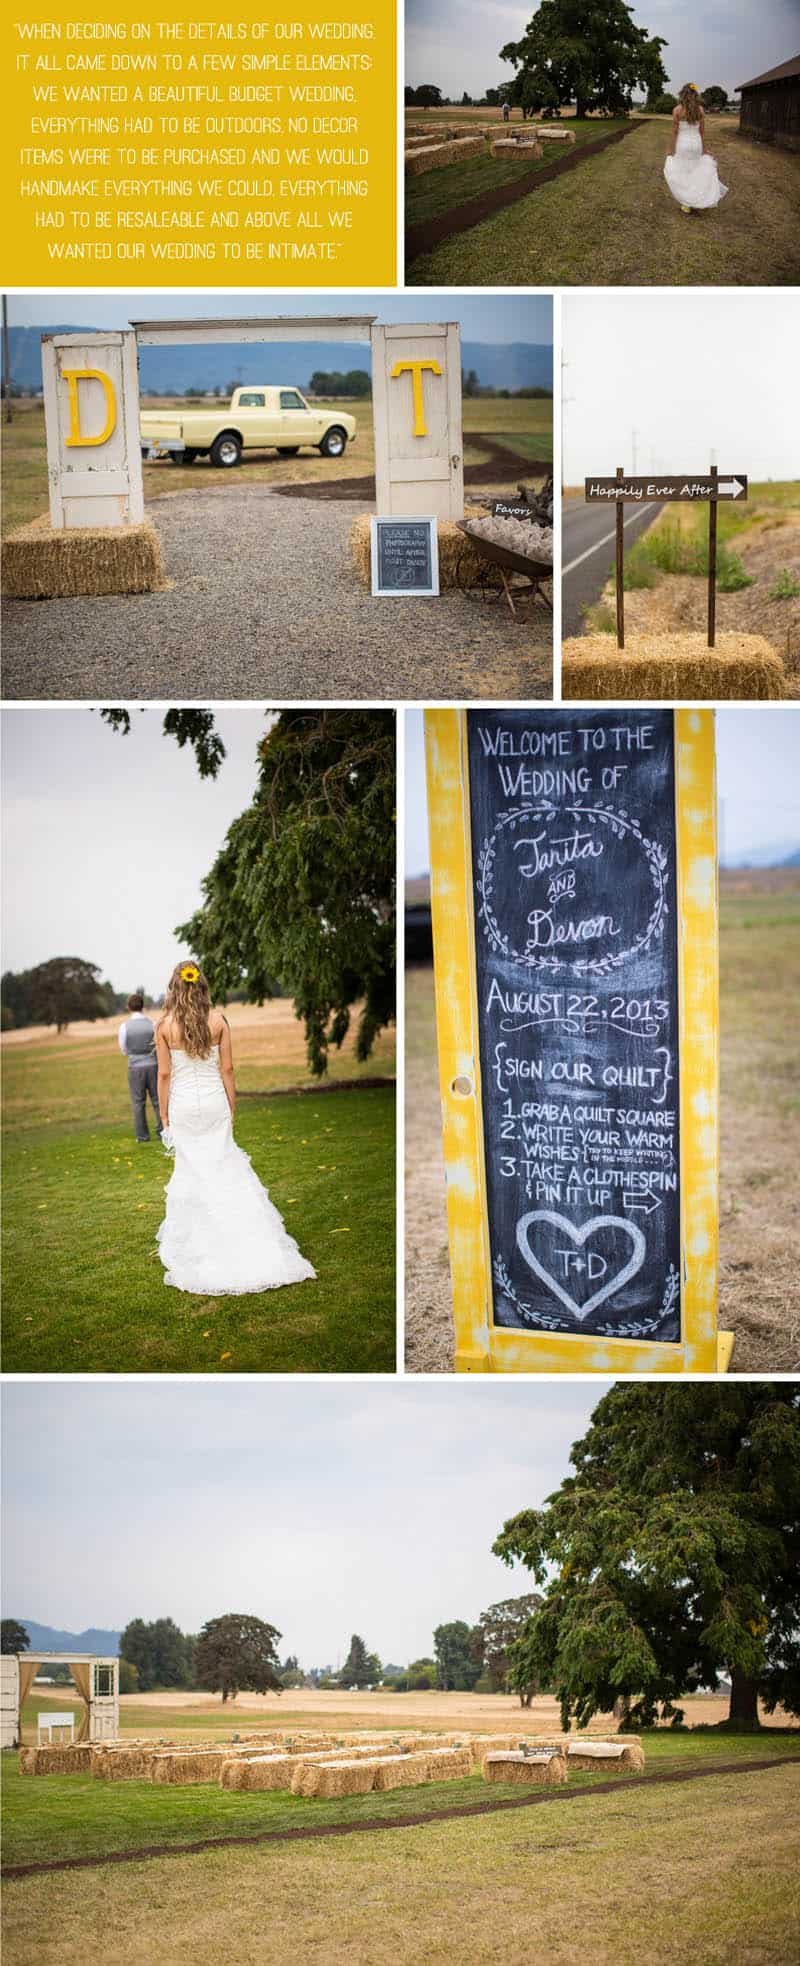 A Rustic Country Wedding for Just £1500 1